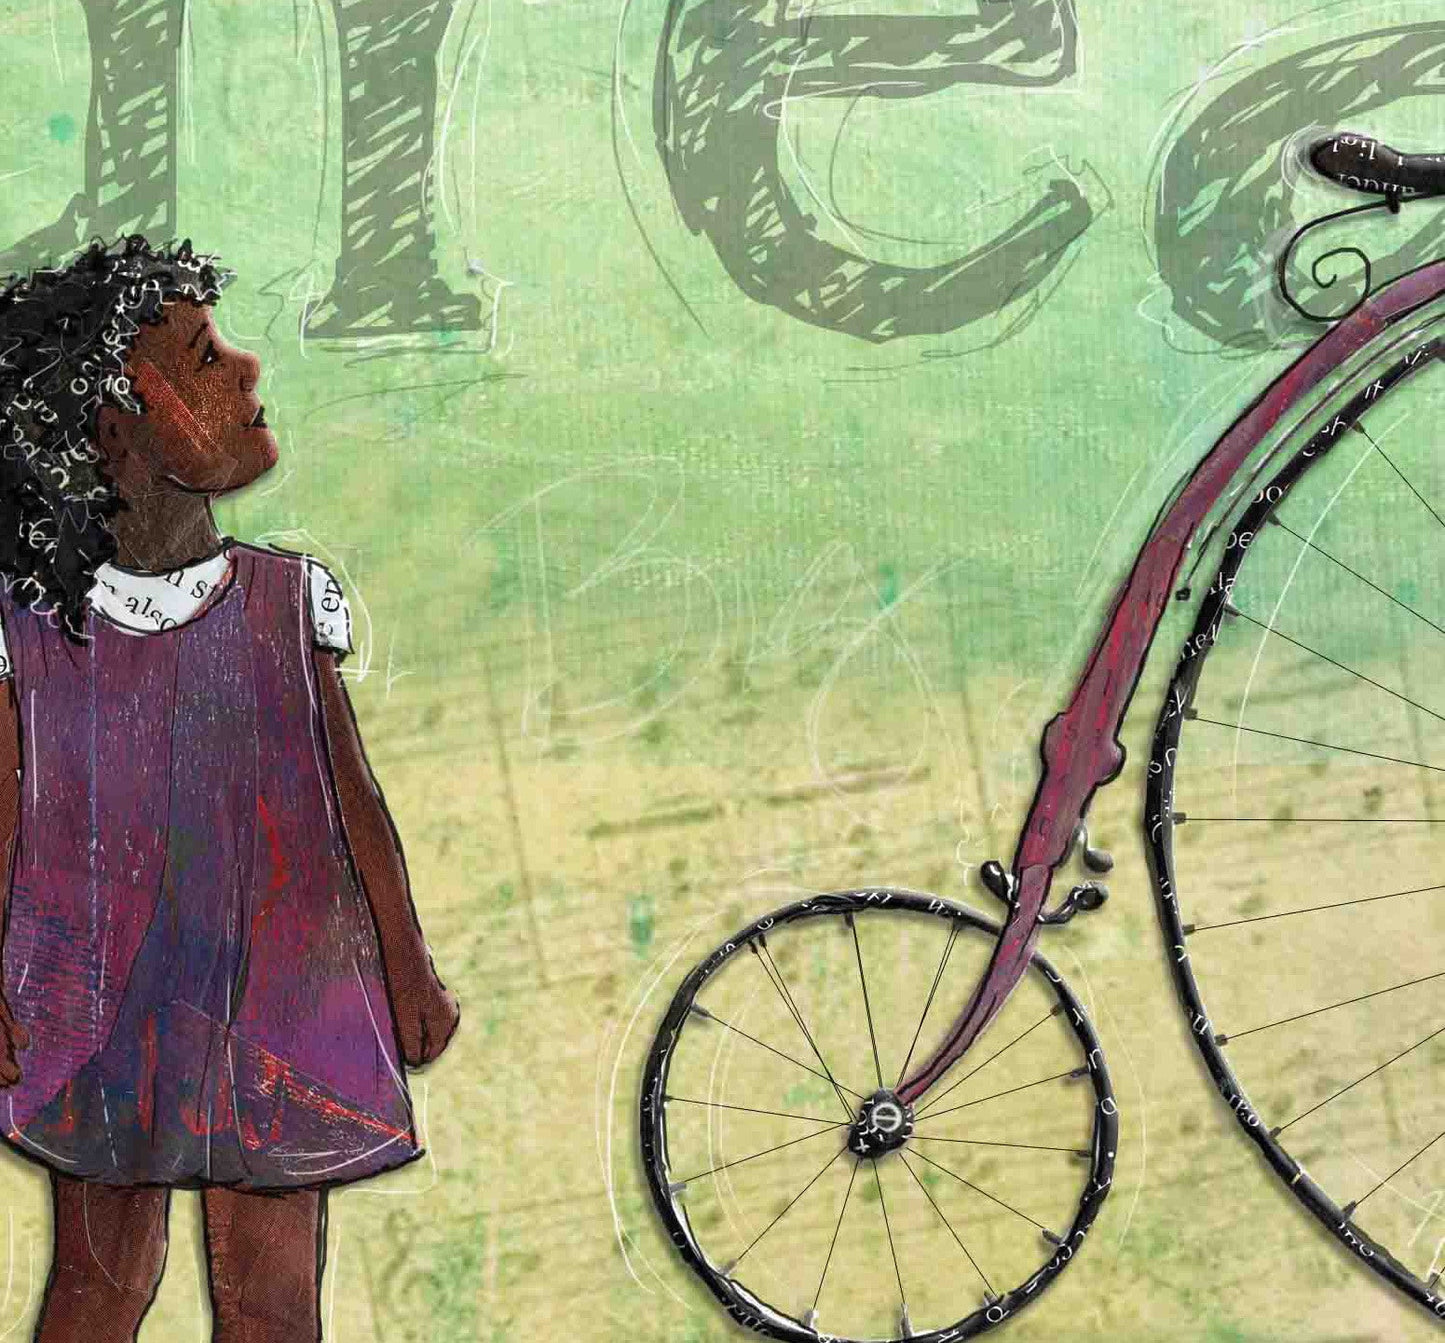 8x10 Art print of a Paper Collage of a Child Looking at an Old Fashioned Bicycle with Dream and Tubman quote - Inspirational Wall Art